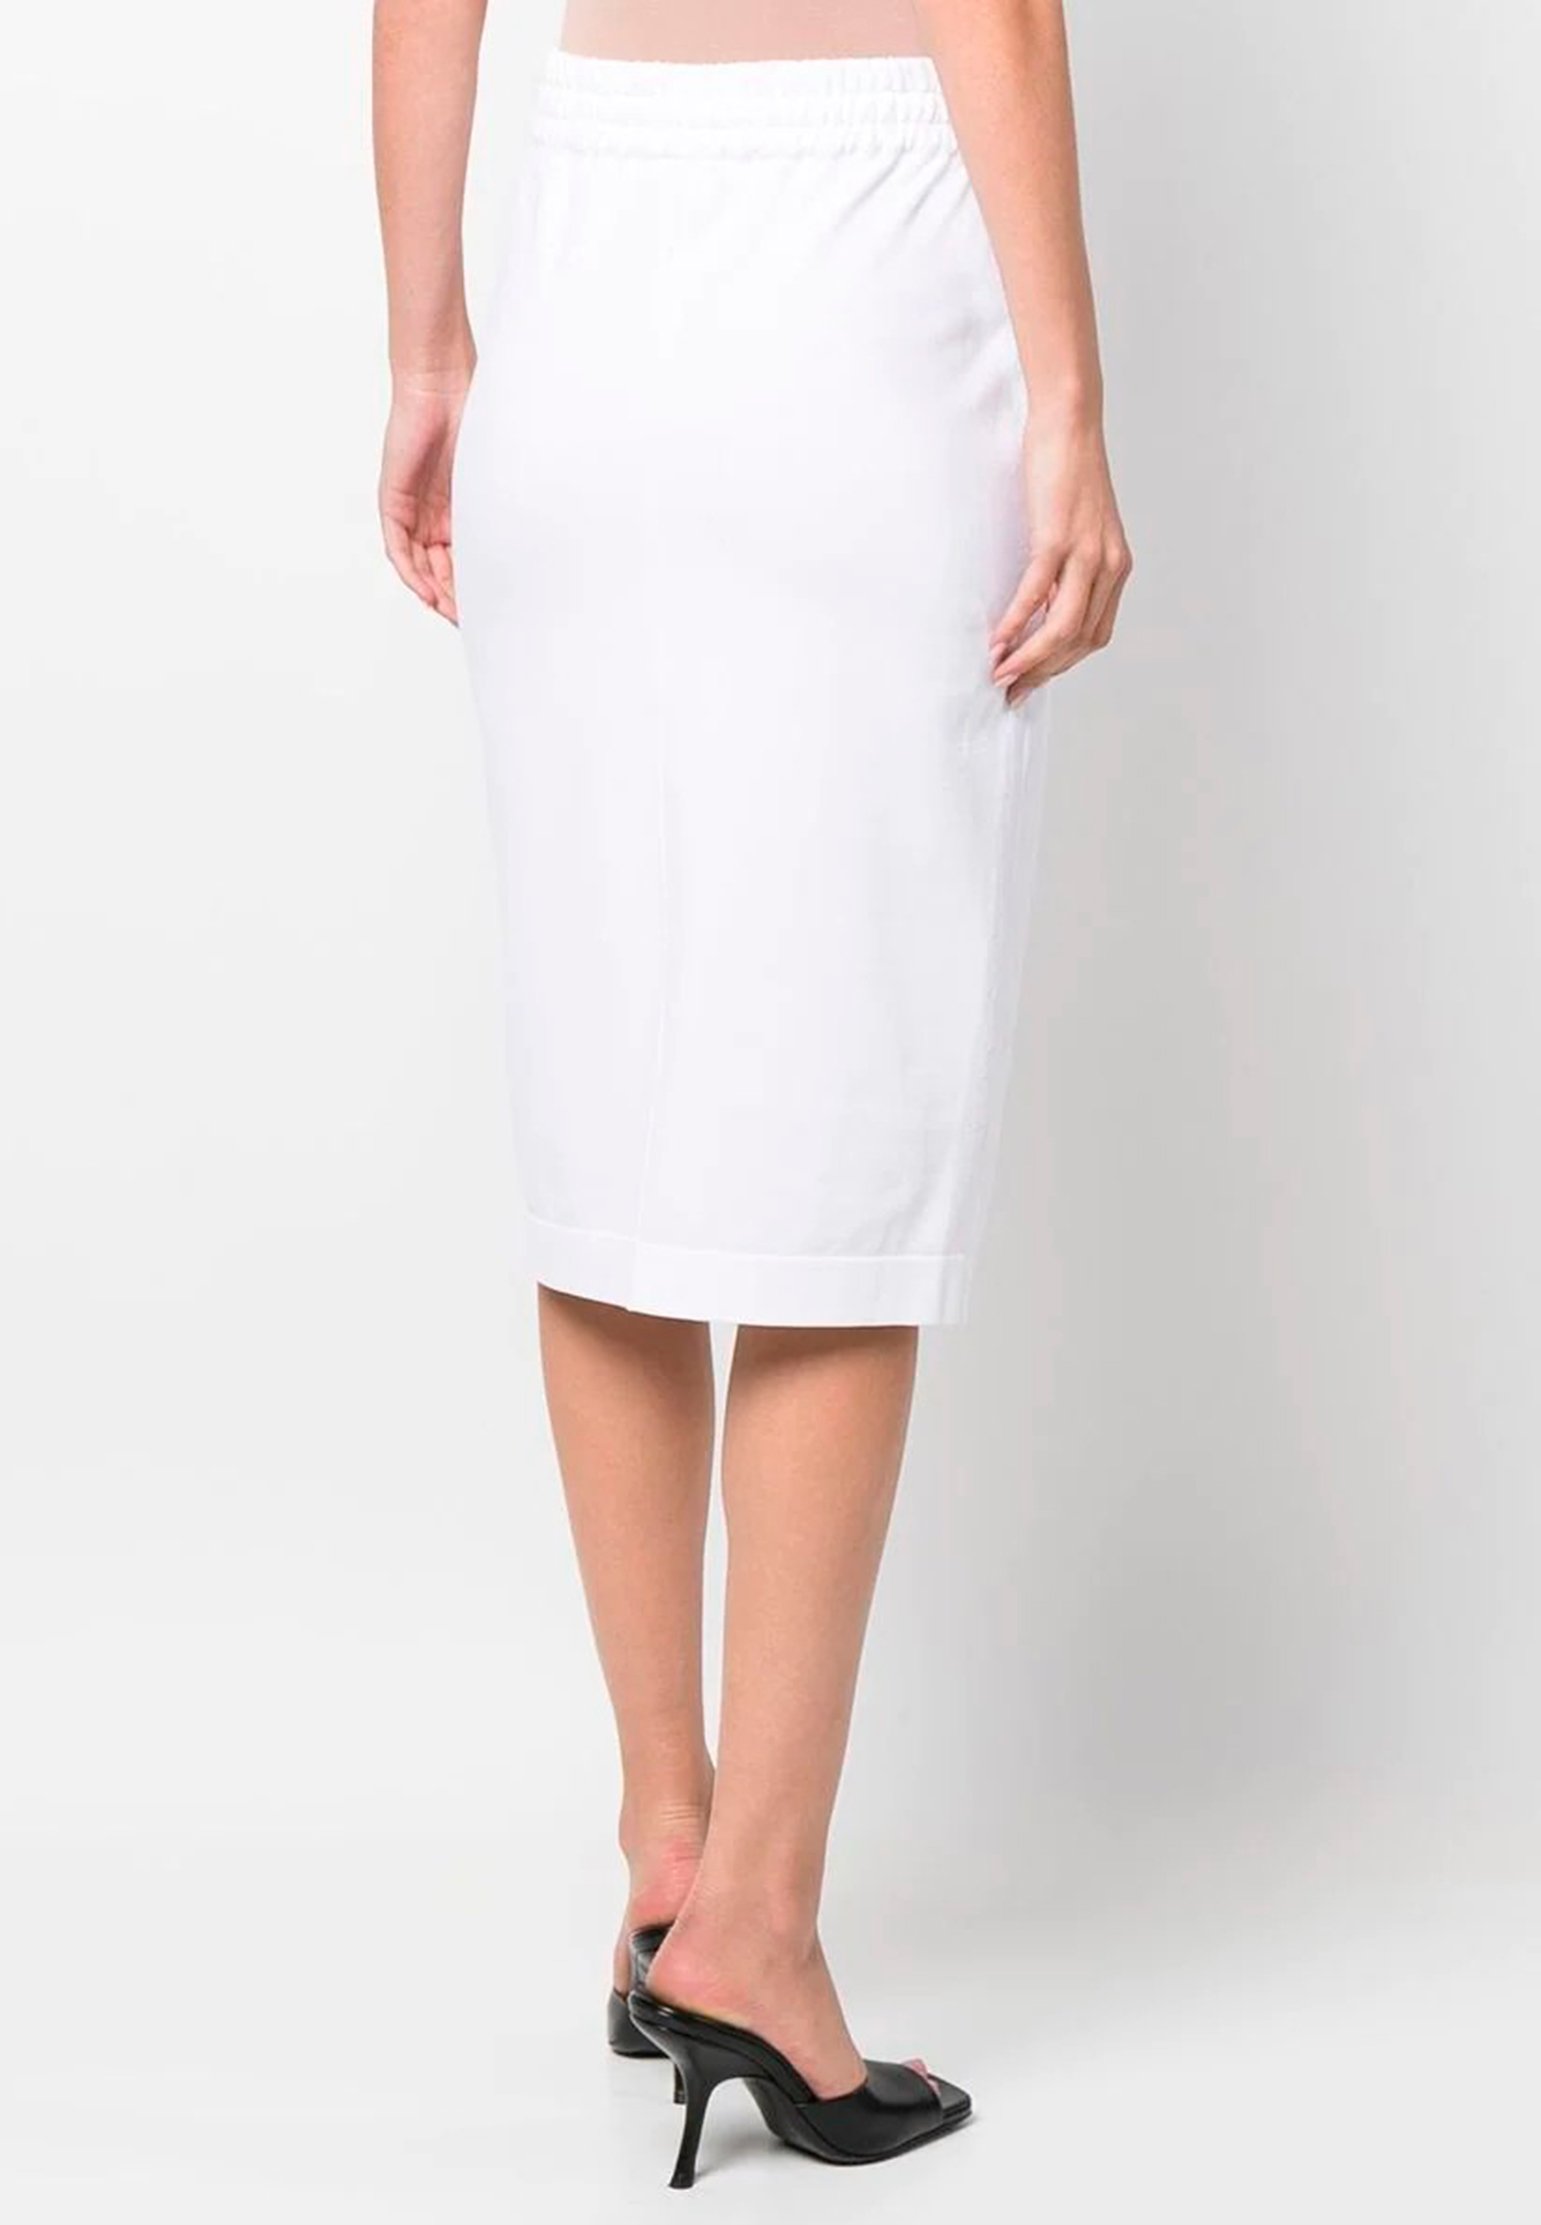 Skirt TOM FORD Color: white (Code: 571) in online store Allure